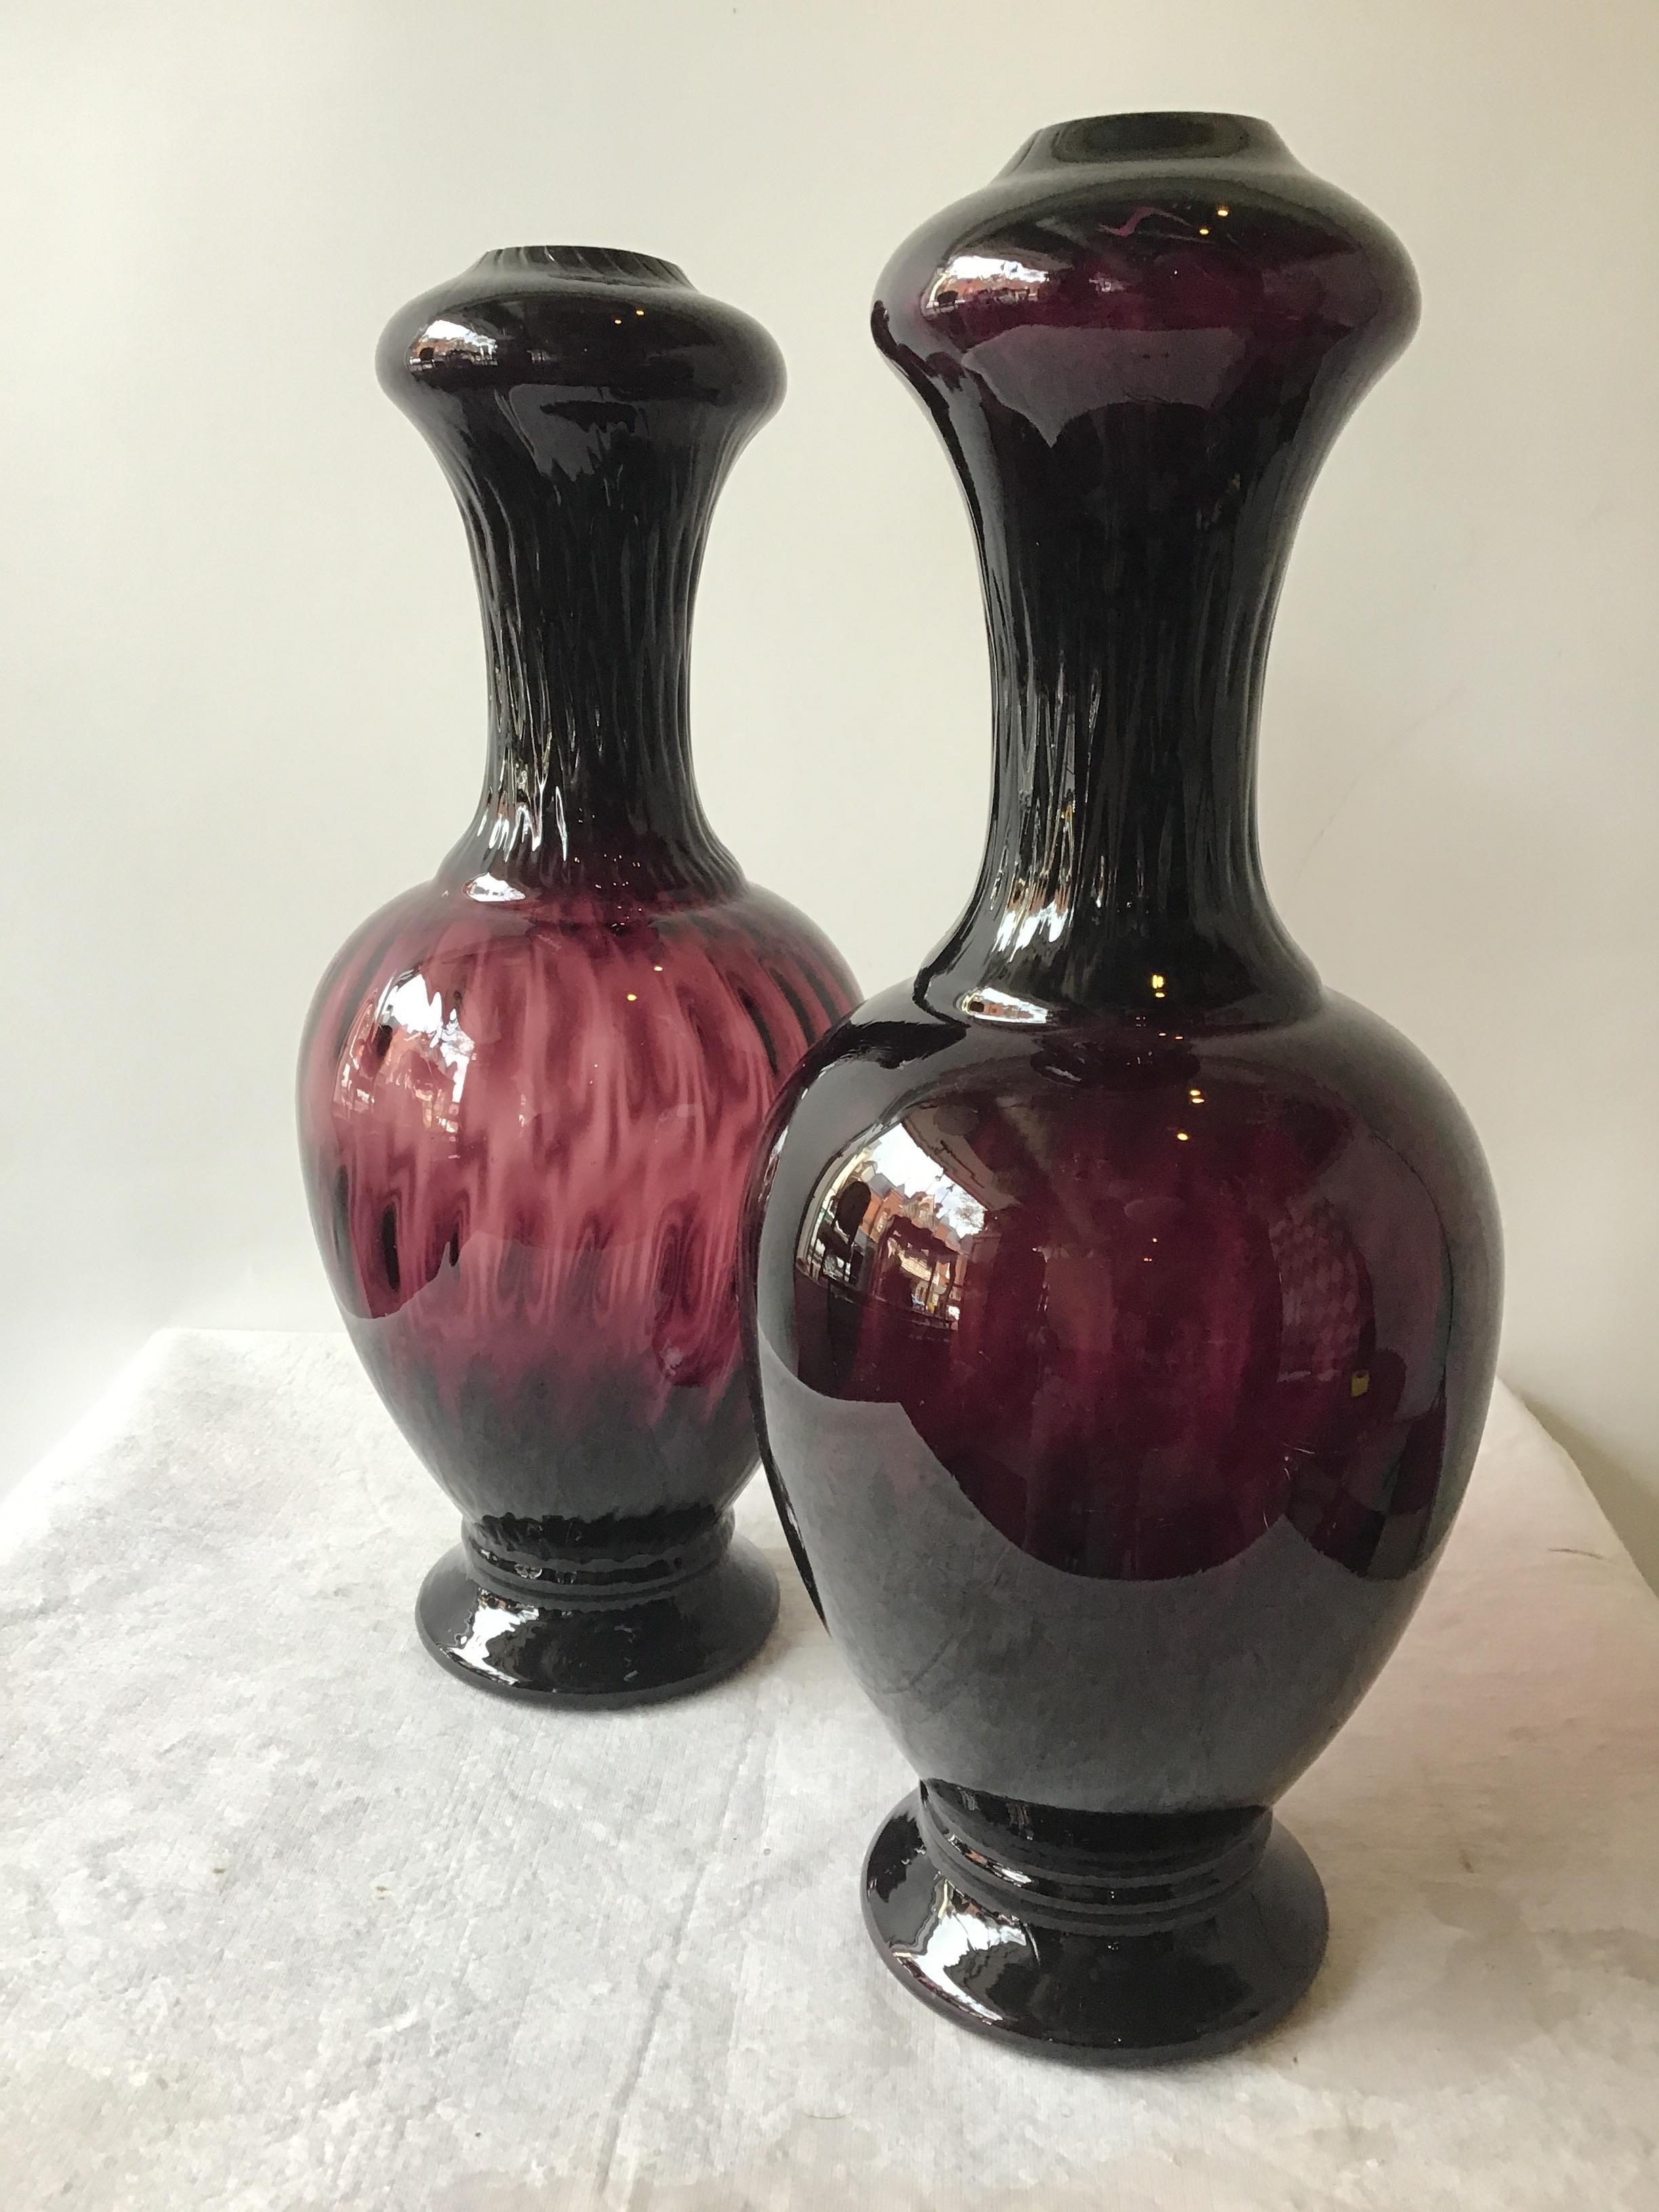 Pair of 1960s Aubergine Murano lamp bodies by Balboa.
Lamps need all parts in order to be turned into functioning lights.
One lamp is darker then the other since there hand blown.